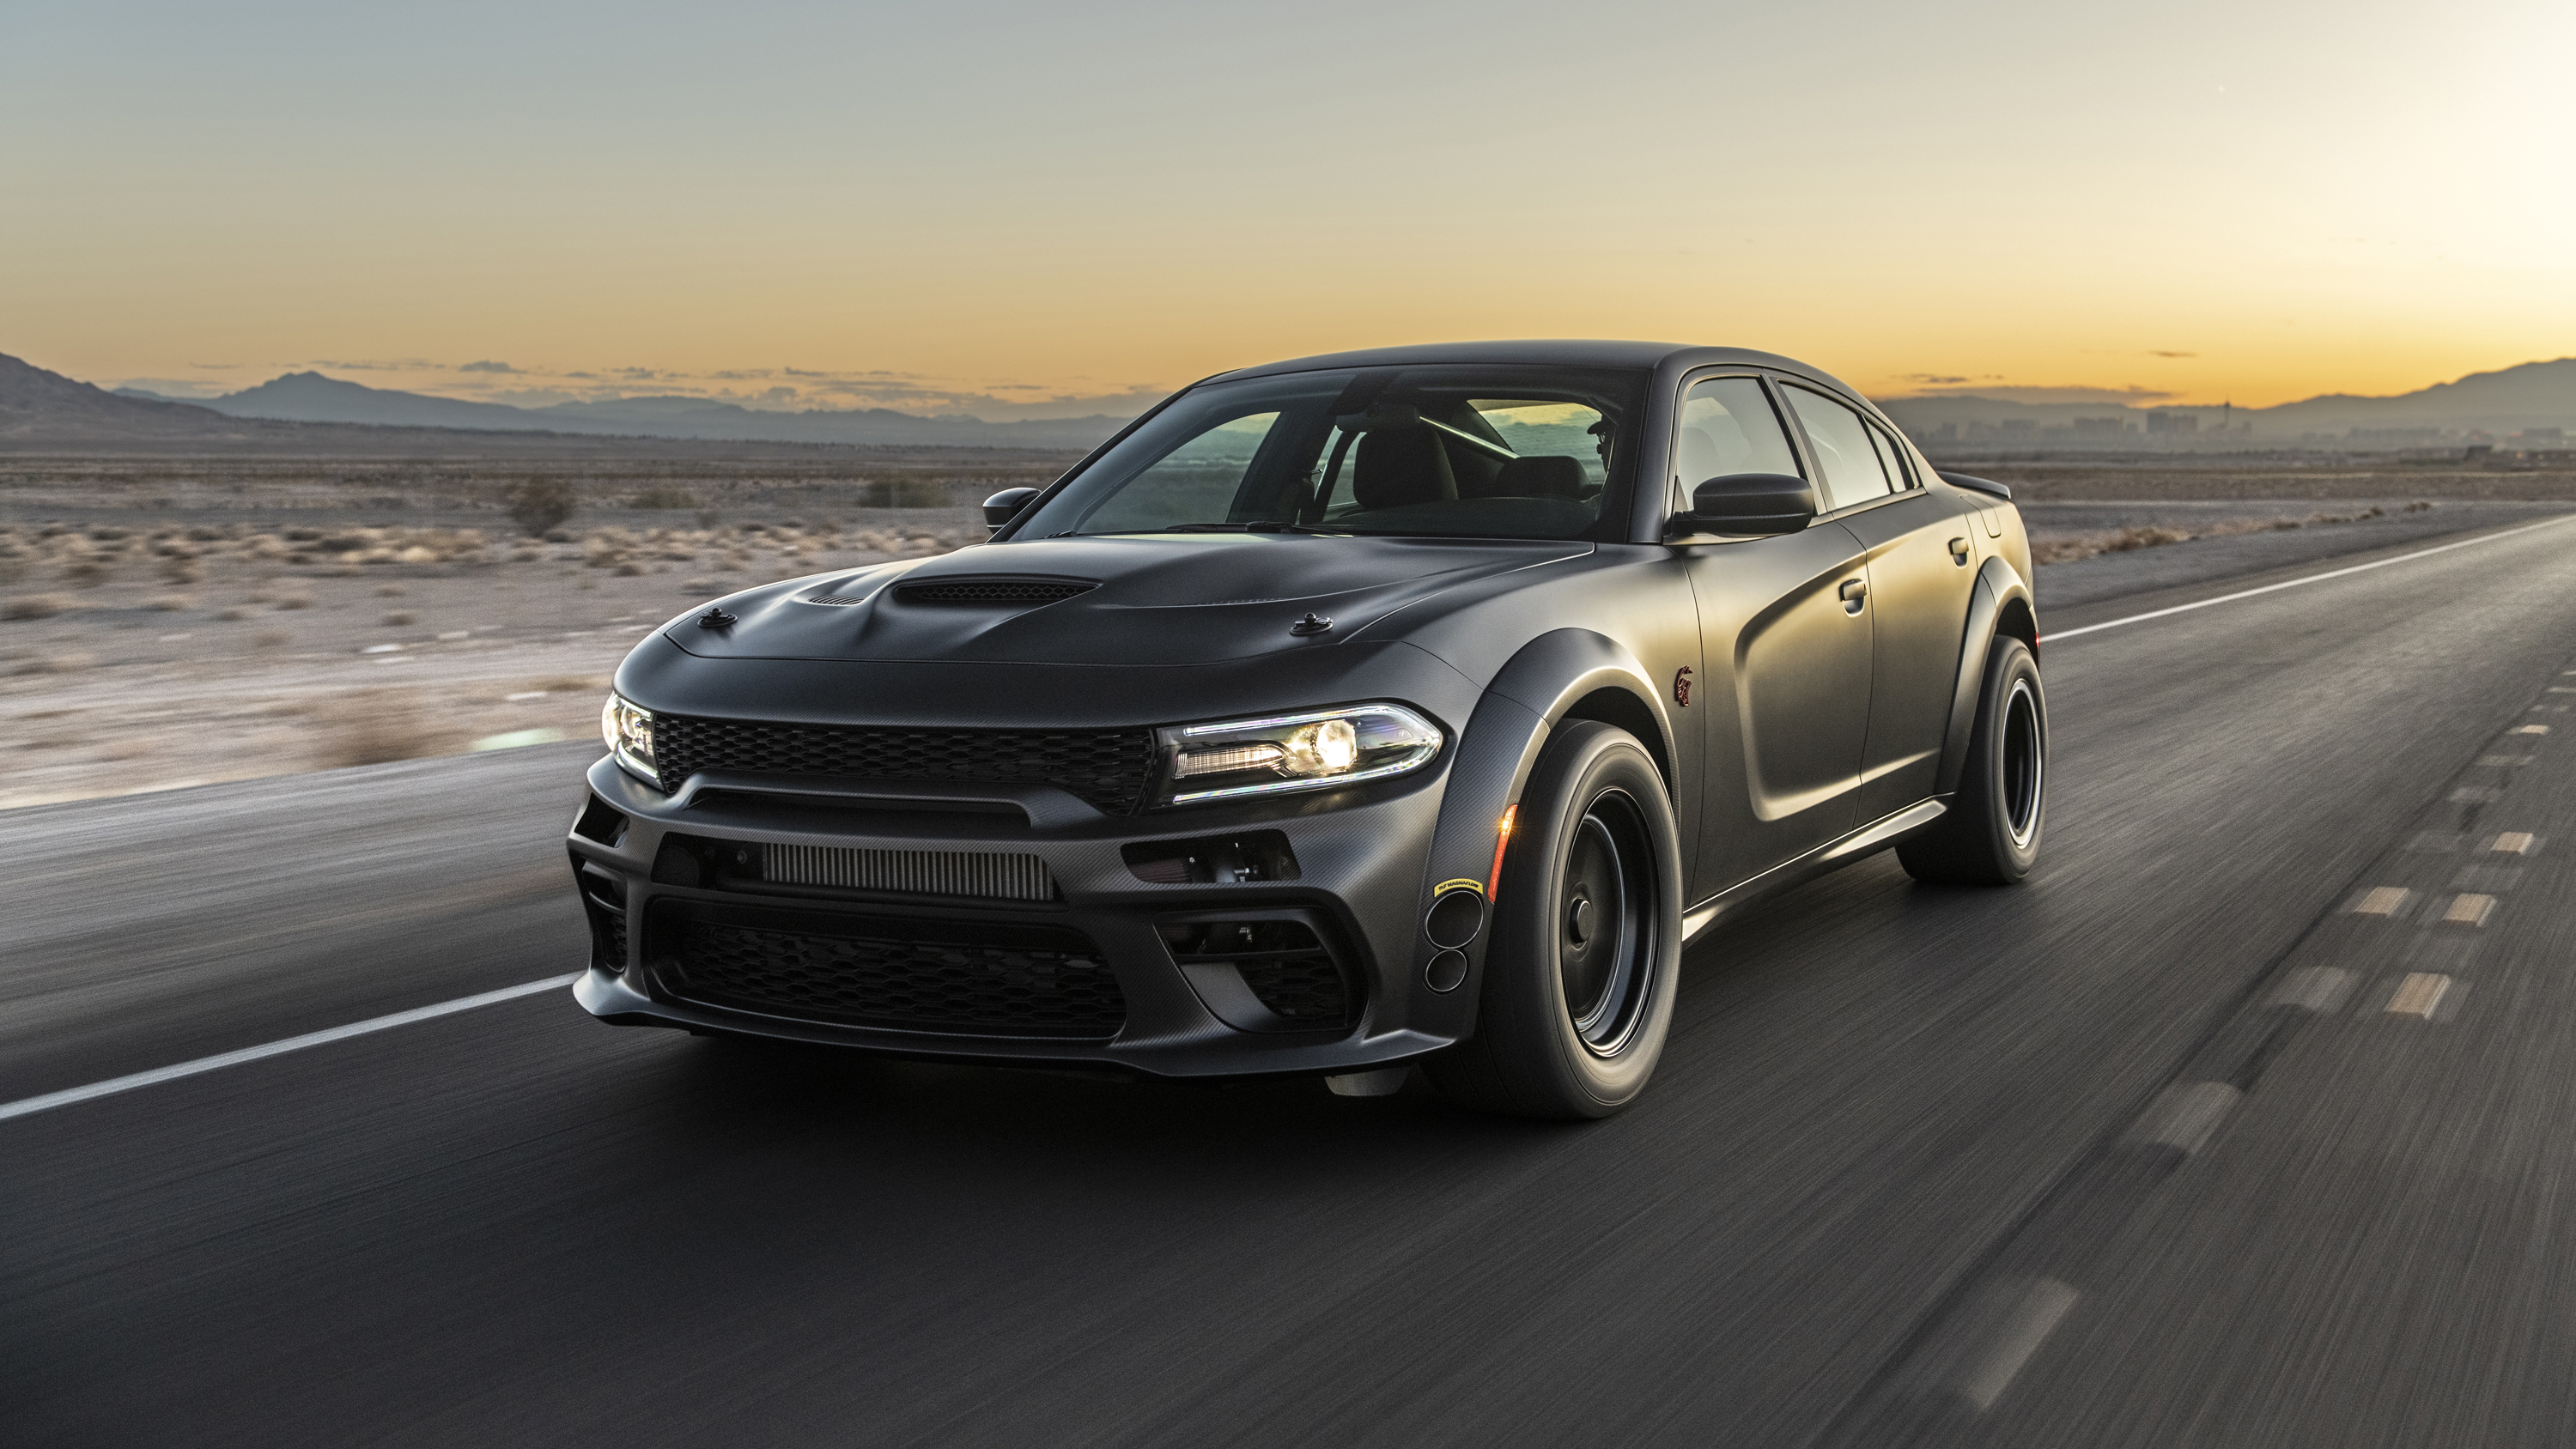 SpeedKore Dodge Charger AWD Twin Turbo Carbon Wallpaper. HD Car Wallpaper